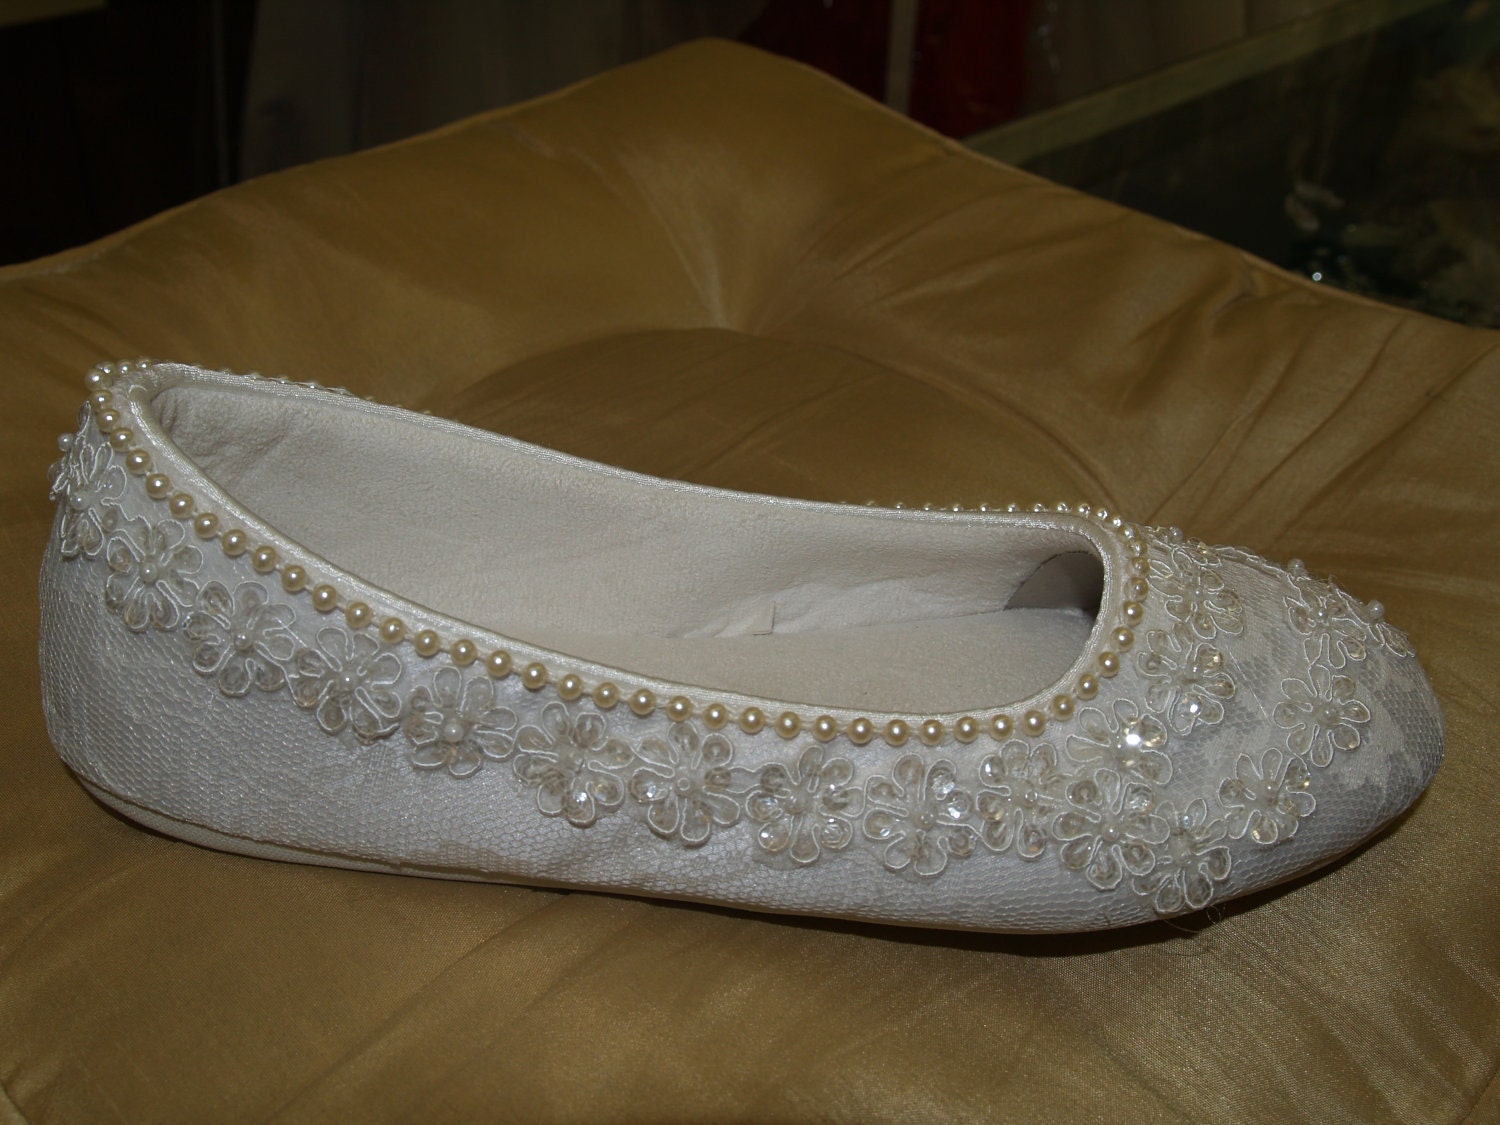 Wedding Ivory Flats Vegan Shoes Embellished with hand sewn pearls and ivory